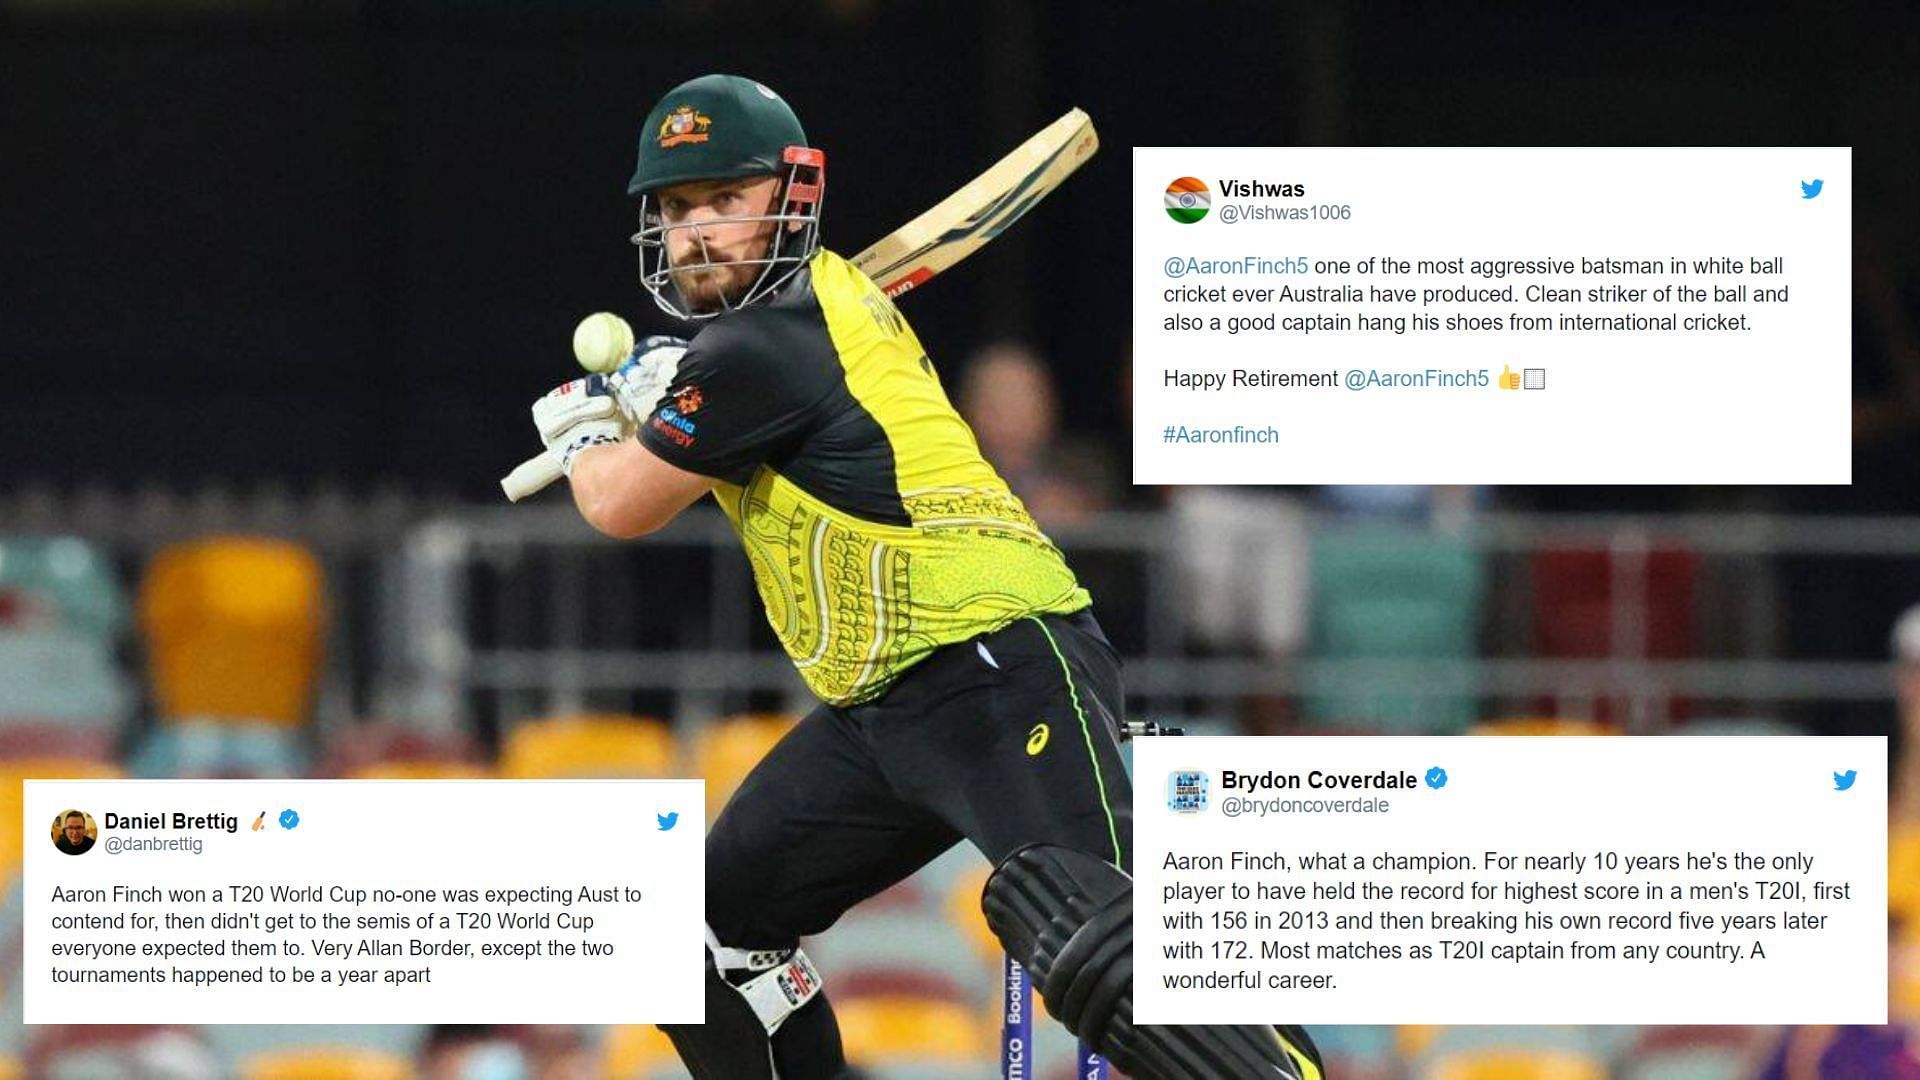 &quot;One of the greatest ever T20 batters&quot; - Twitter reacts after Aaron Finch announces retirement from international cricket